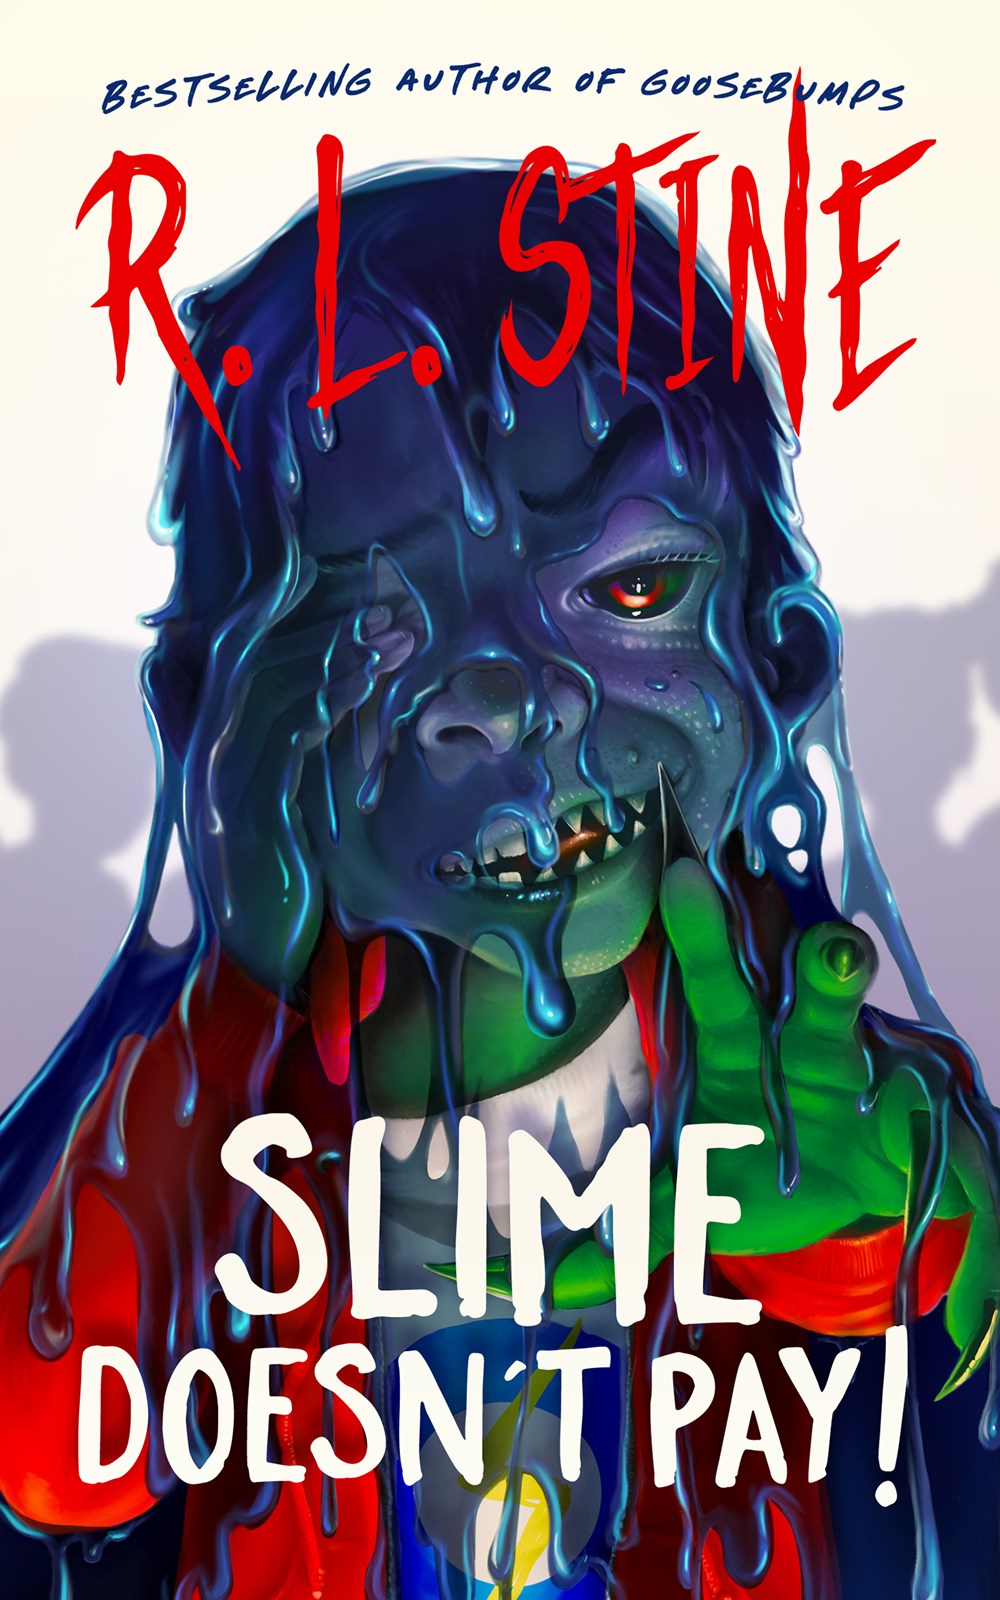 Slime Doesn't Pay! - R. L. Stine